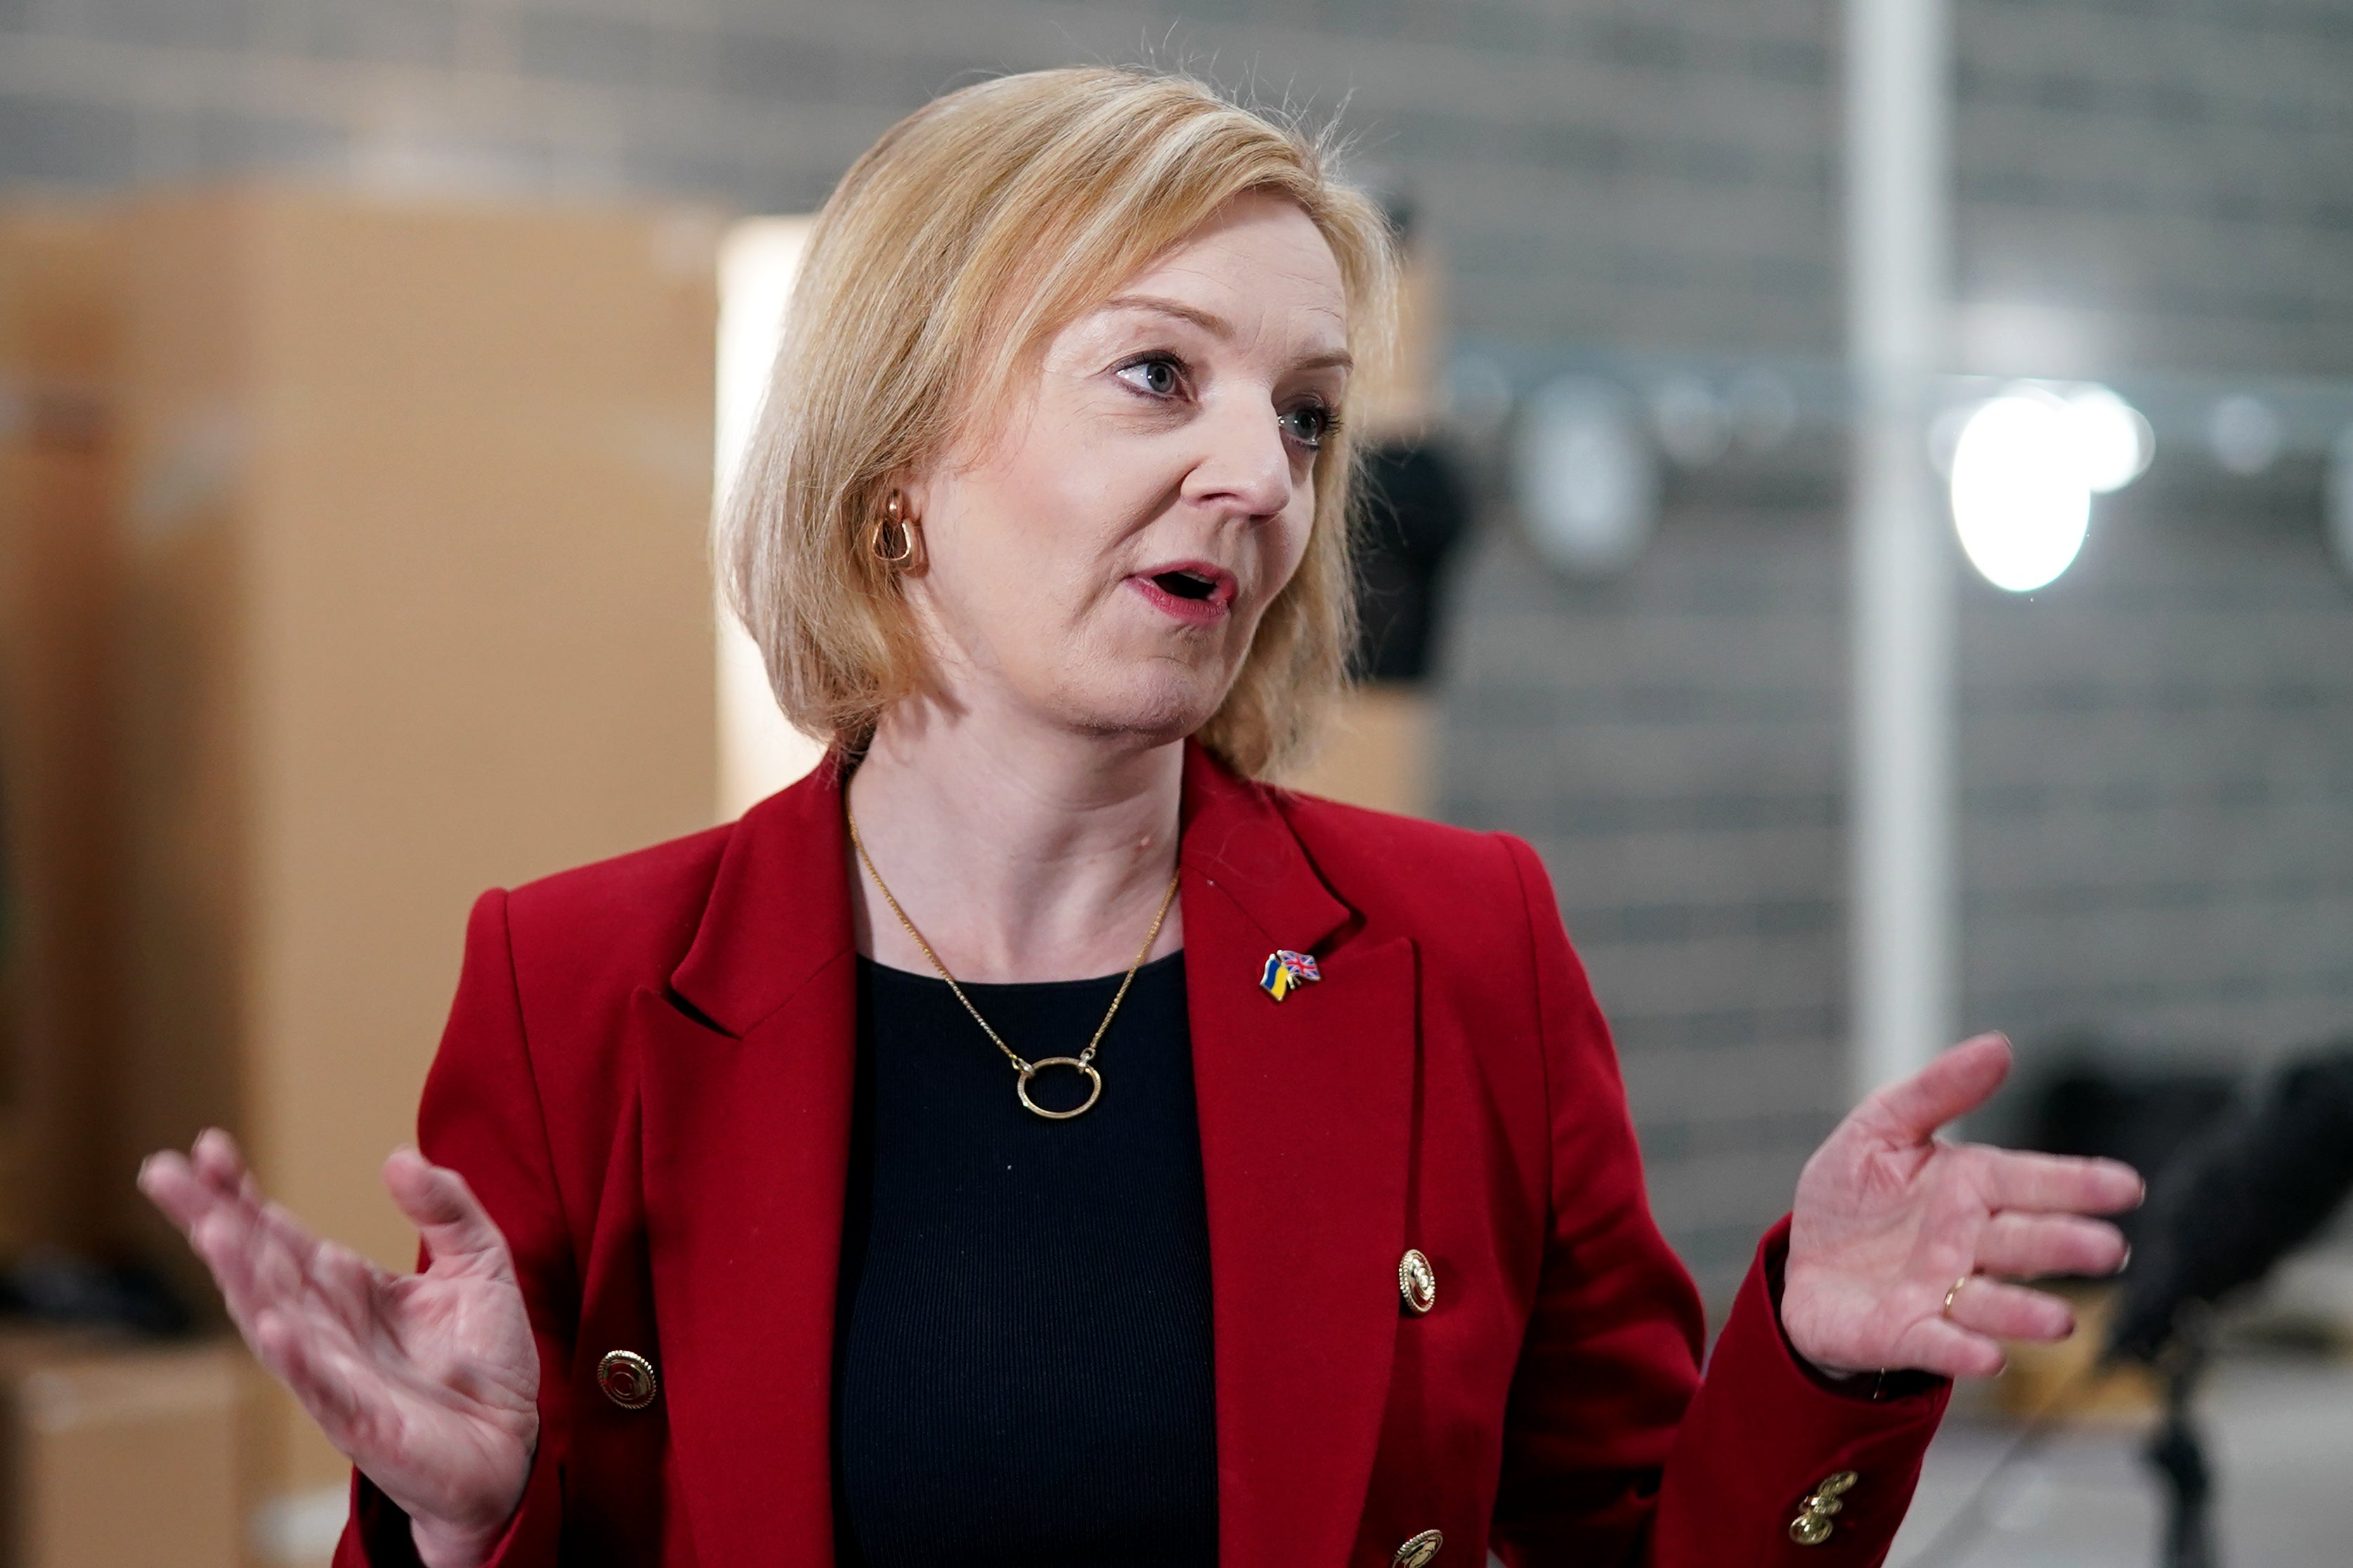 Liz Truss has said she is ‘completely committed’ to building Northern Powerhouse Rail and wants ‘really fantastic rail services’ in the North (Ian Forsyth/PA)